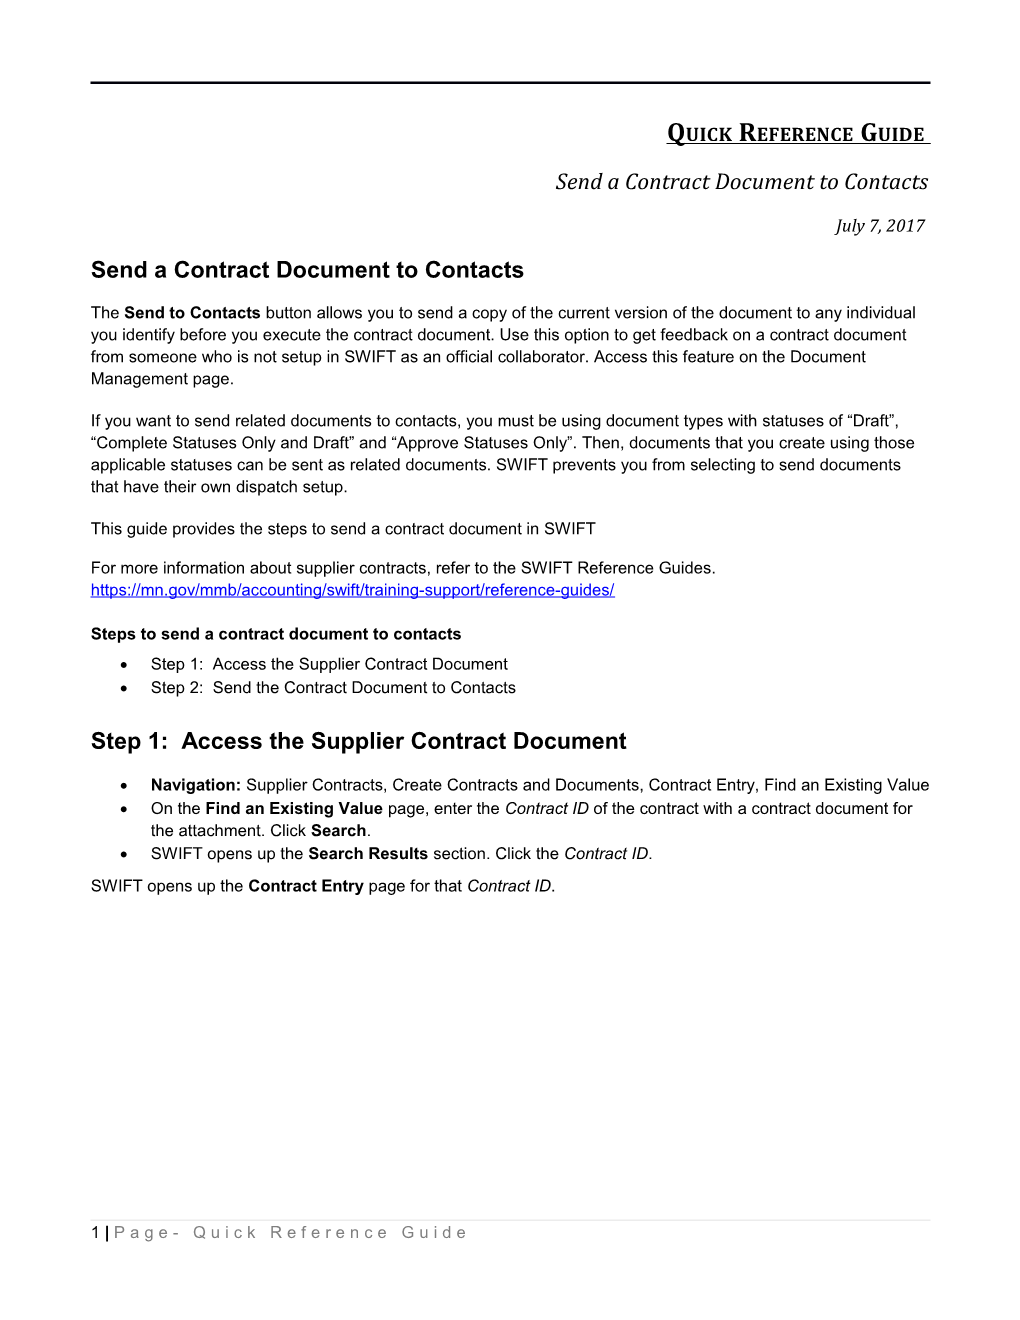 Send a Contract Document to Contacts